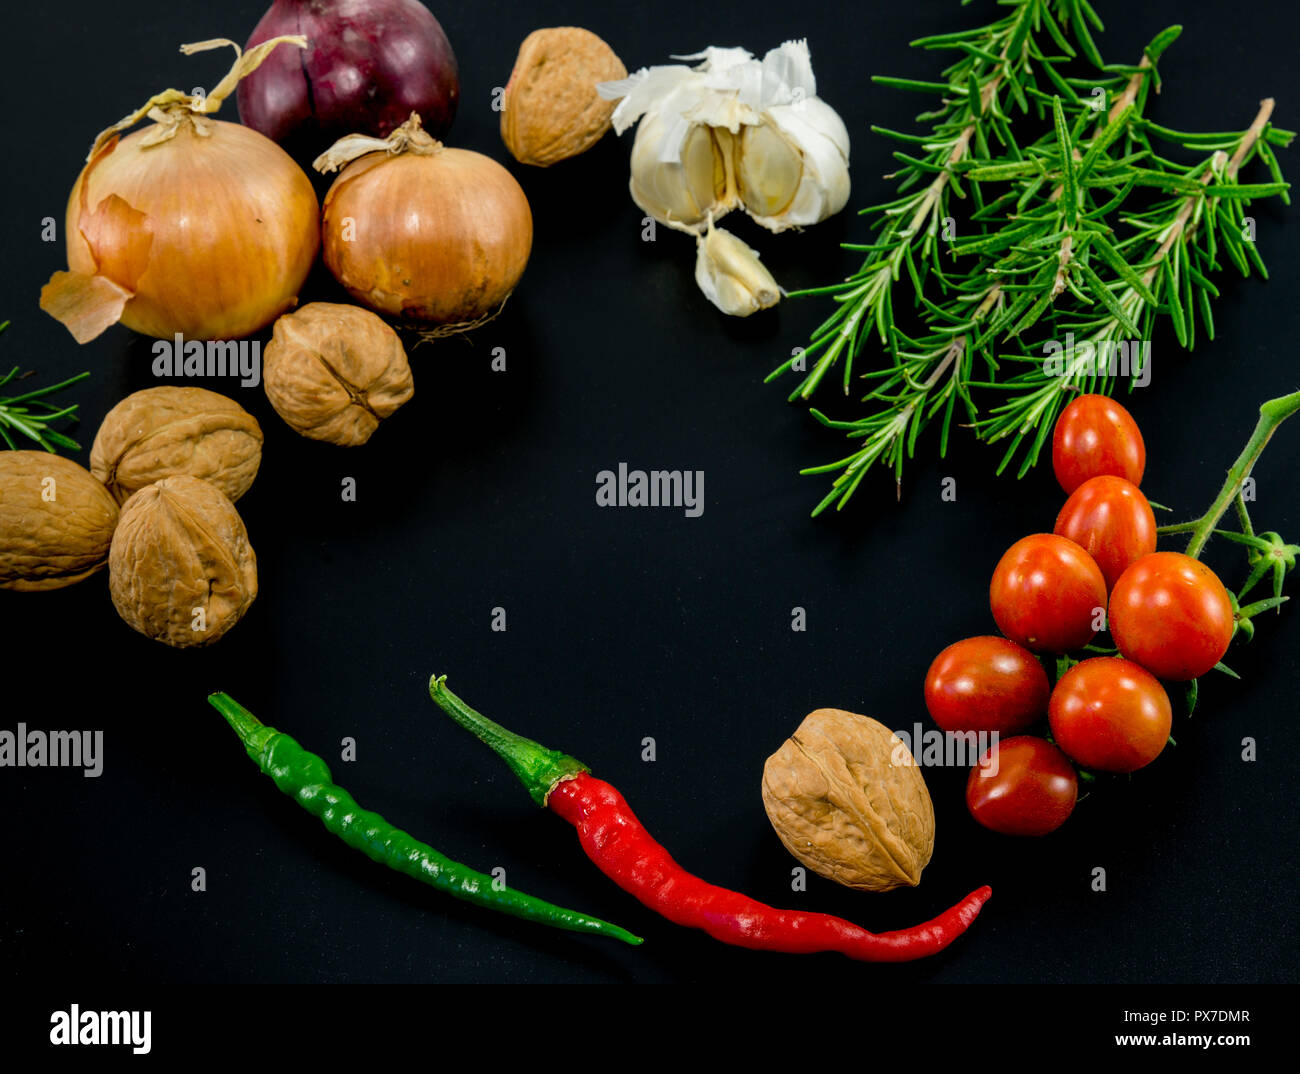 frame of different ingredients foods vegetables and herbs with spce in the middel for text Stock Photo